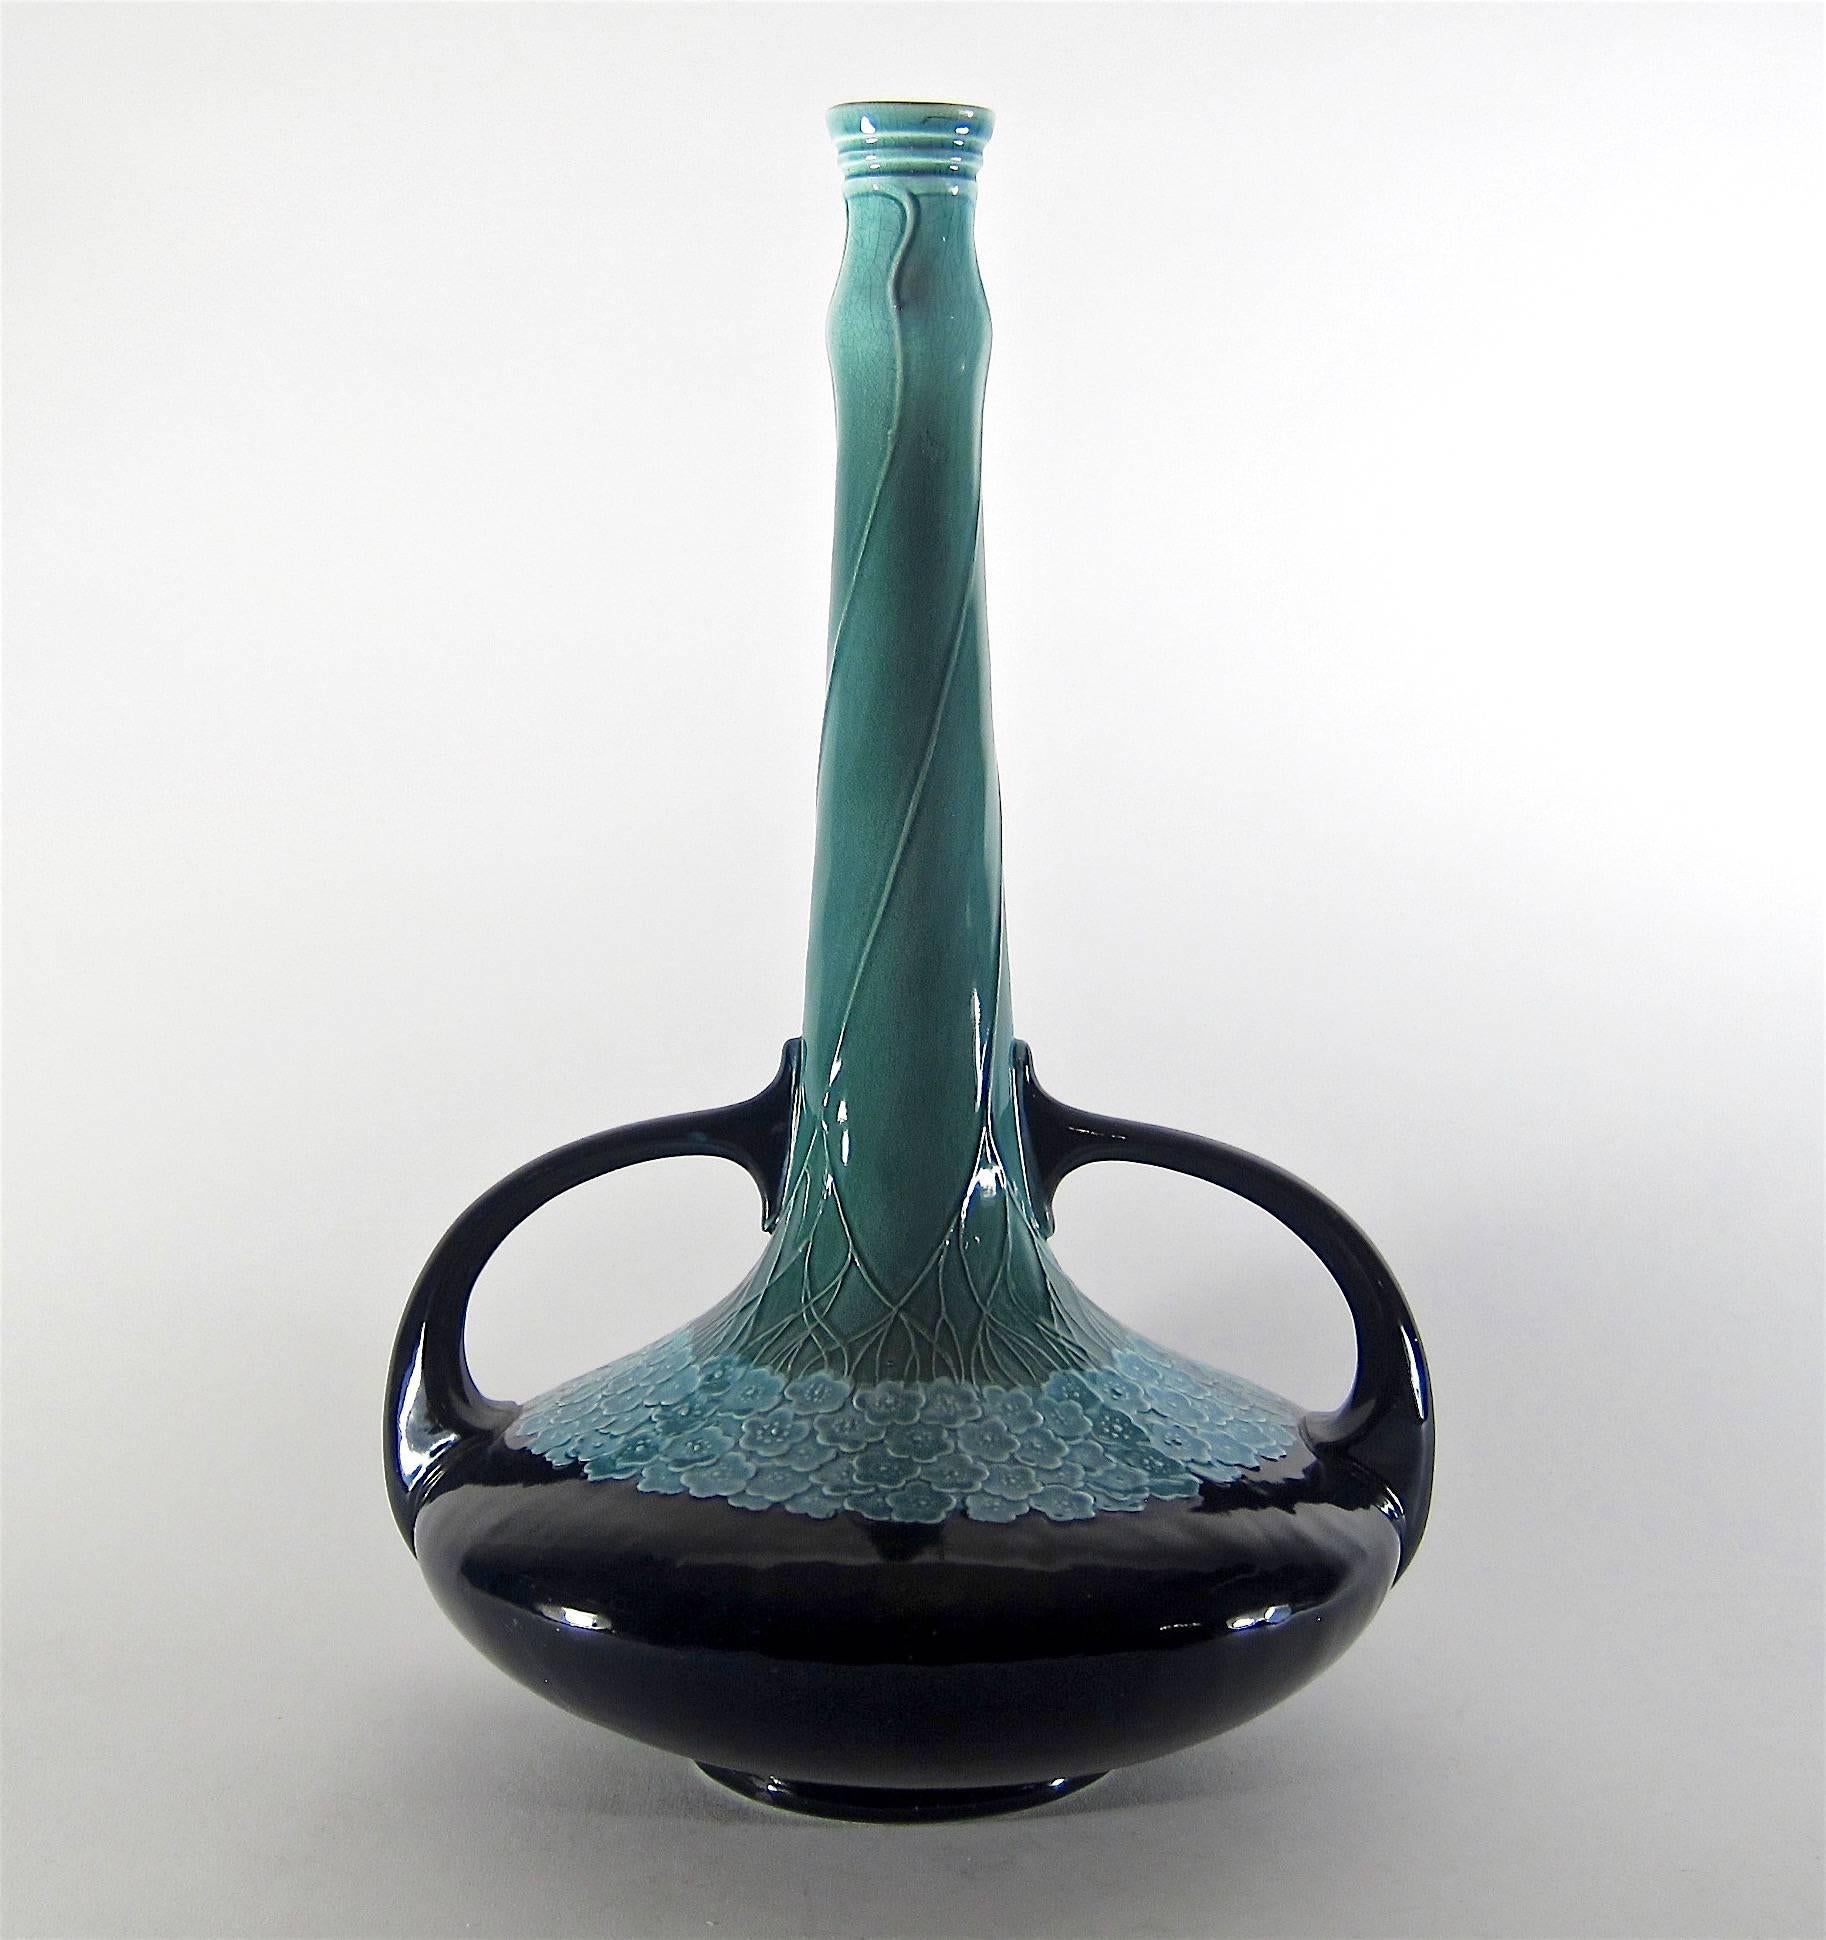 A tall antique double handle vase made in 1904 at the height of the Art Nouveau period at the Villeroy & Boch factory in Mettlach, Germany.

The interior of the vessel is glazed in pale green, the attenuated neck transitions from aqua to teal